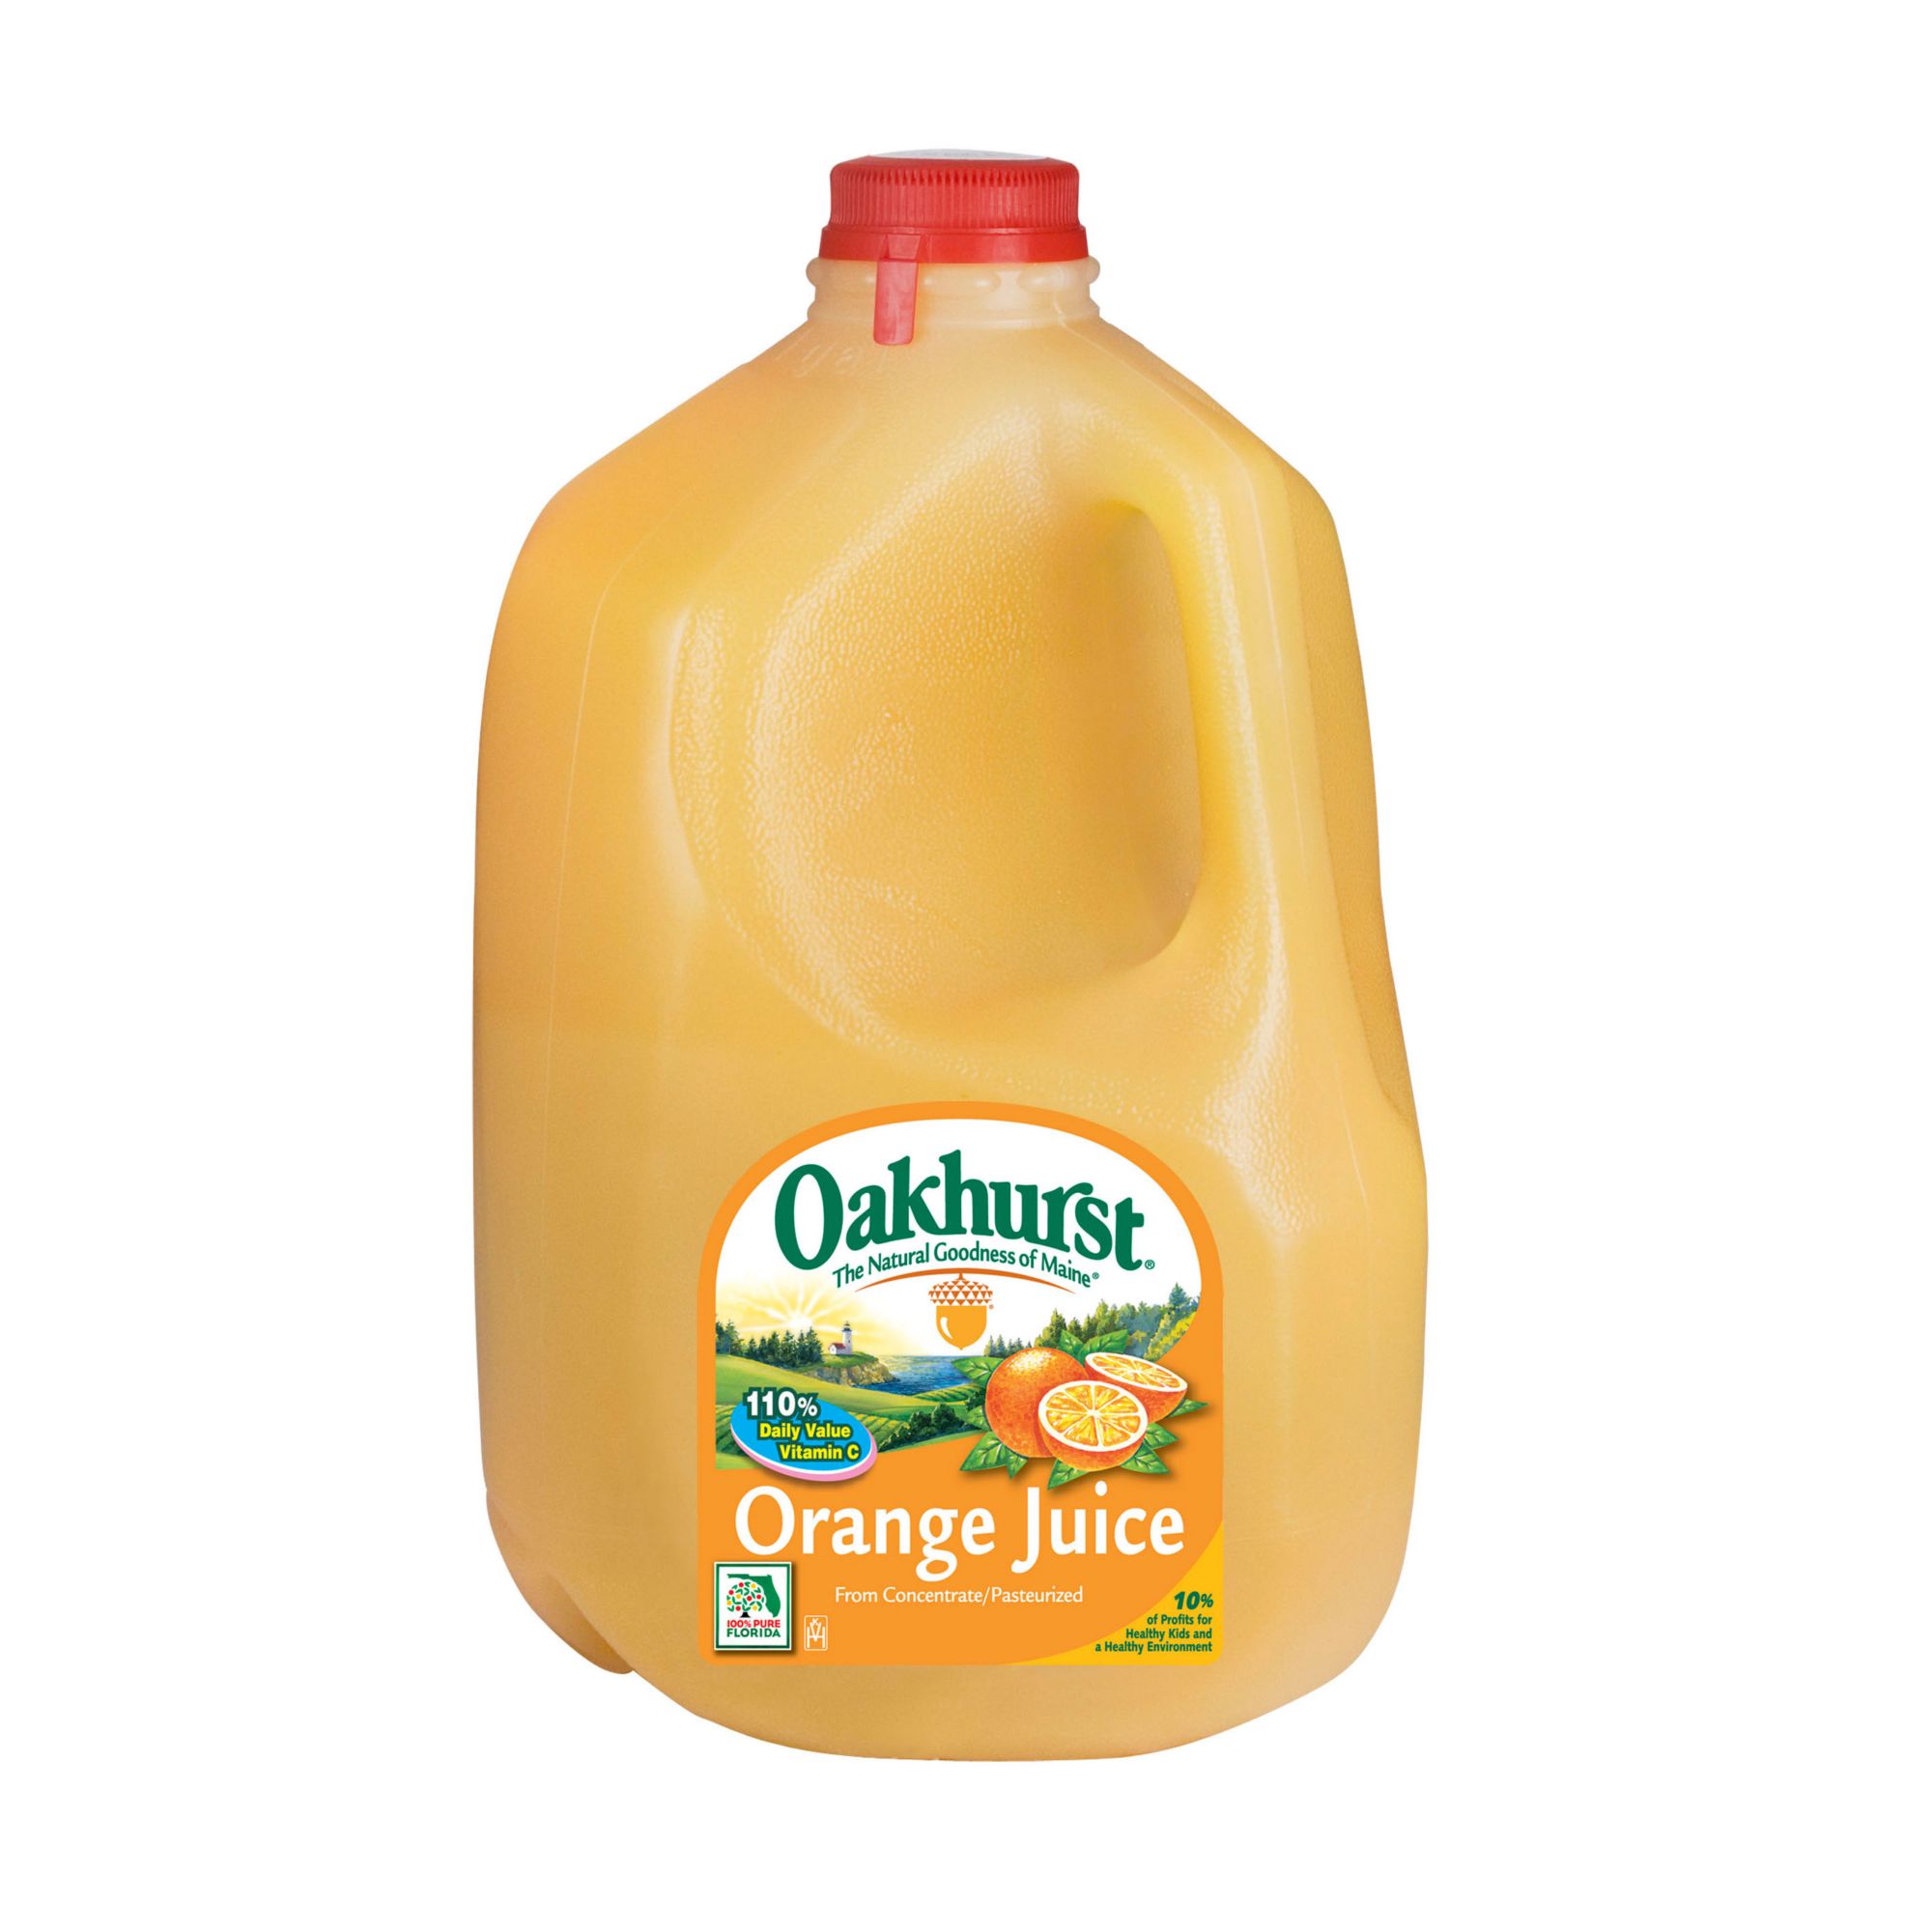 Oakhurst Dairy 100% Orange Juice from Concentrate, 1 gal.